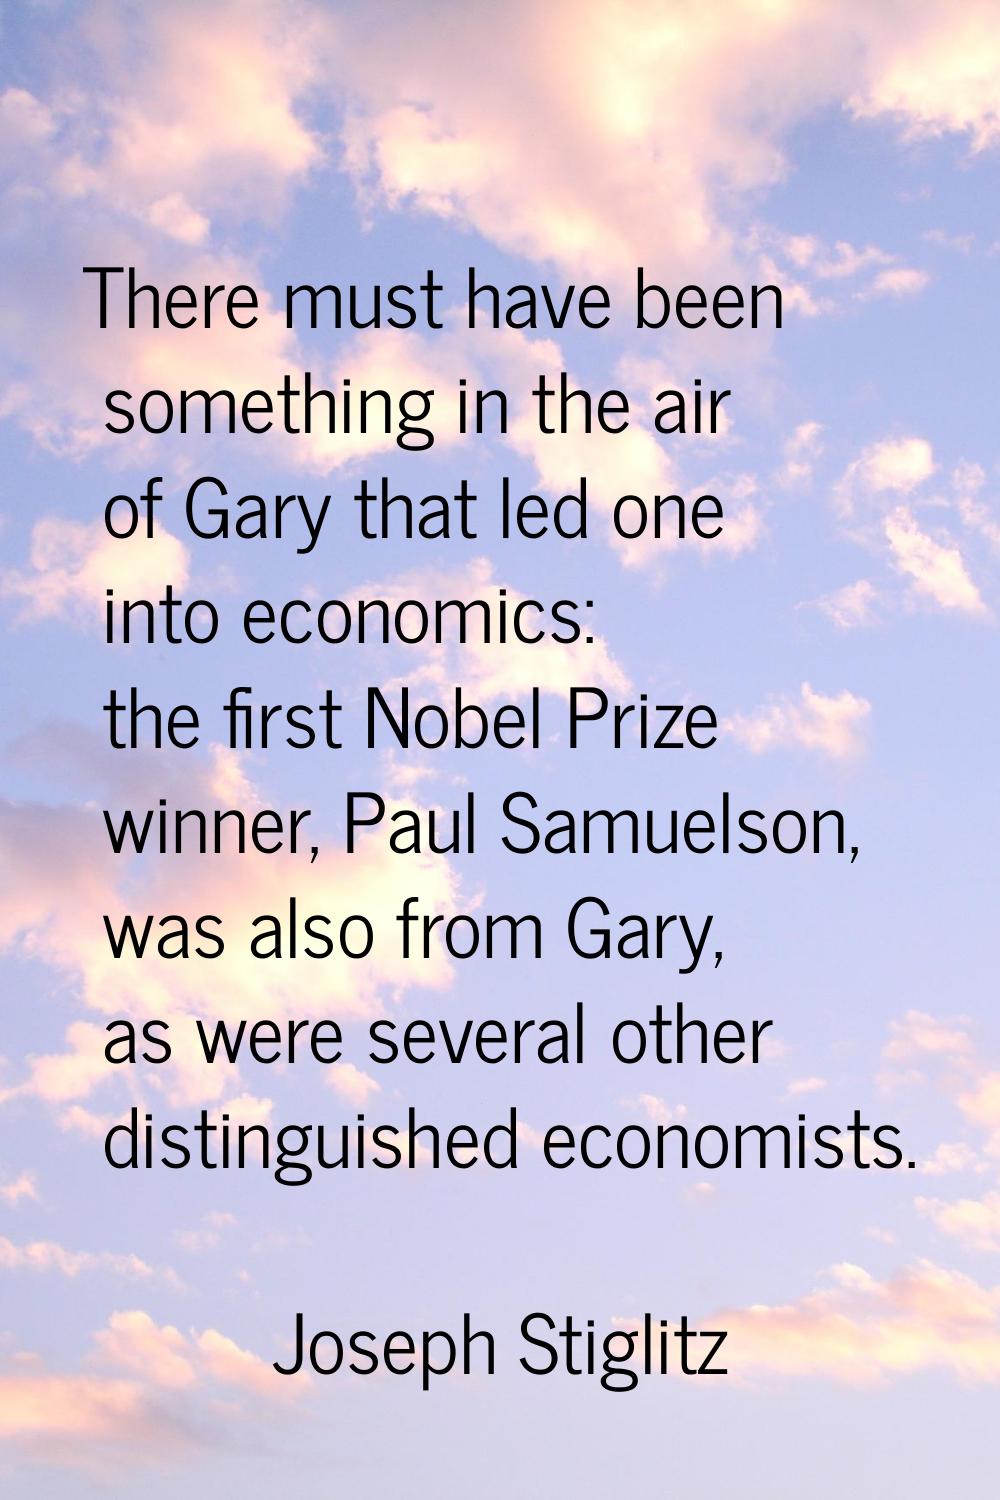 There must have been something in the air of Gary that led one into economics: the first Nobel Priz